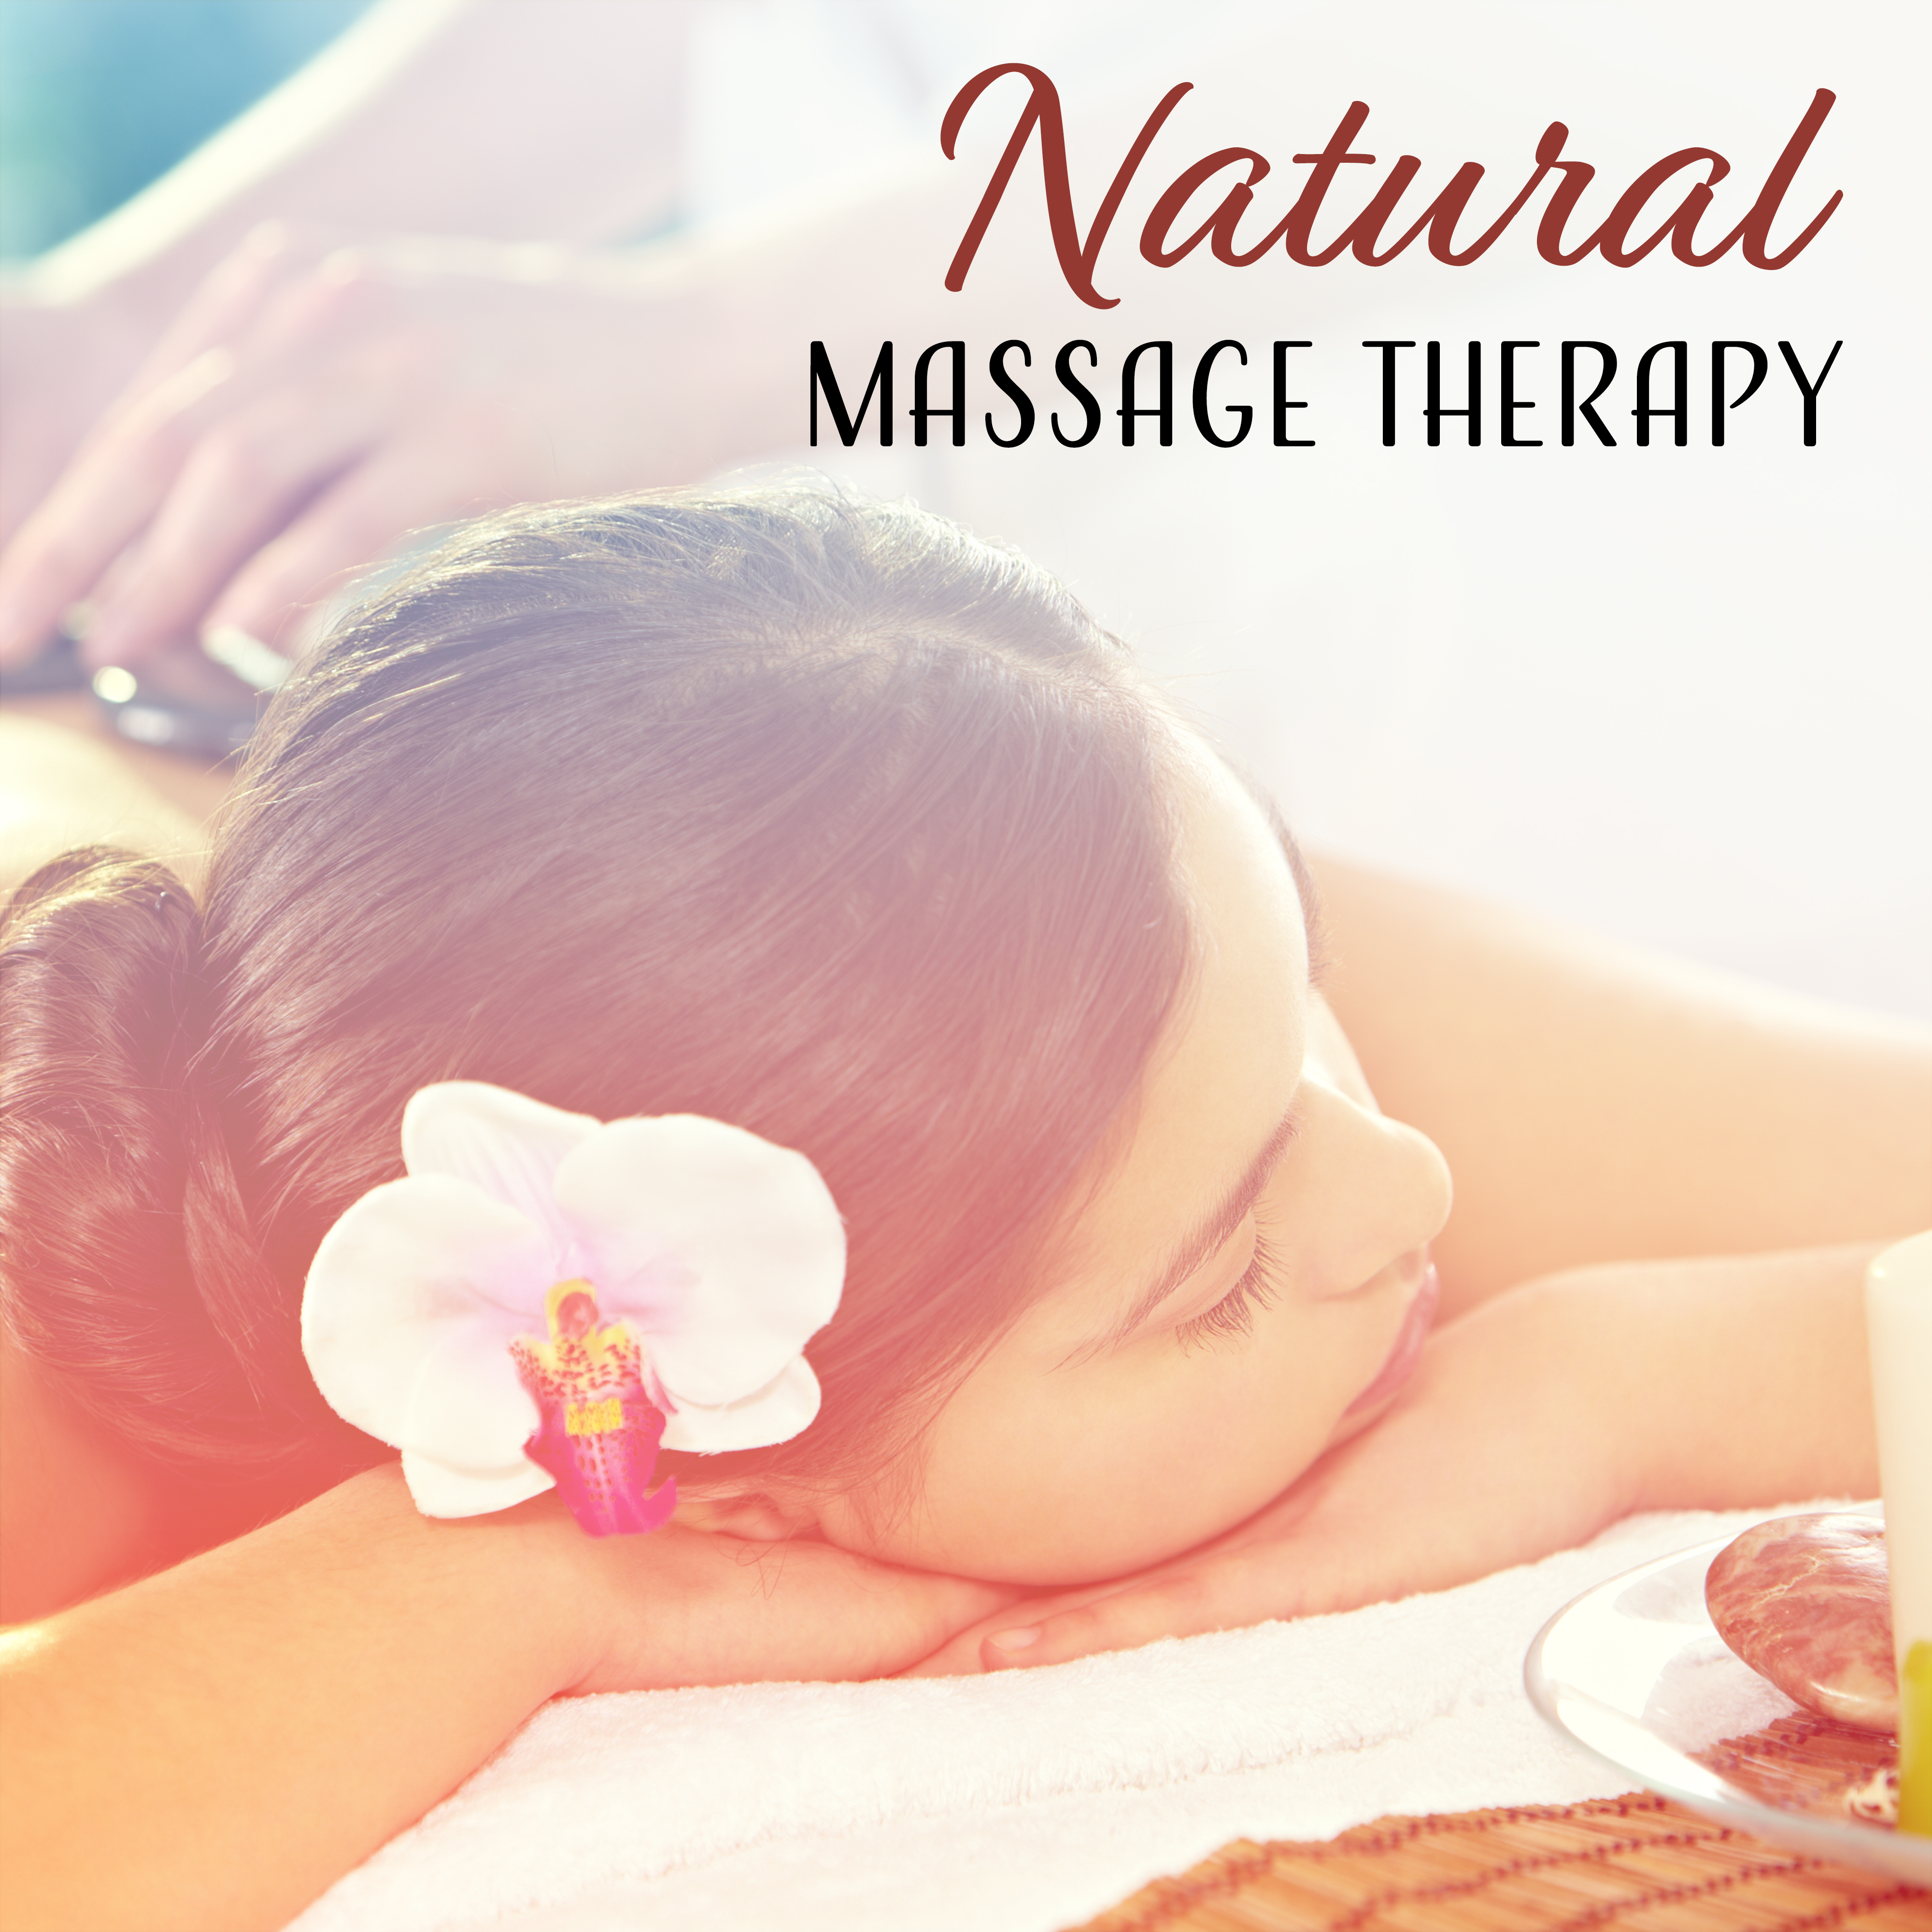 Natural Massage Therapy